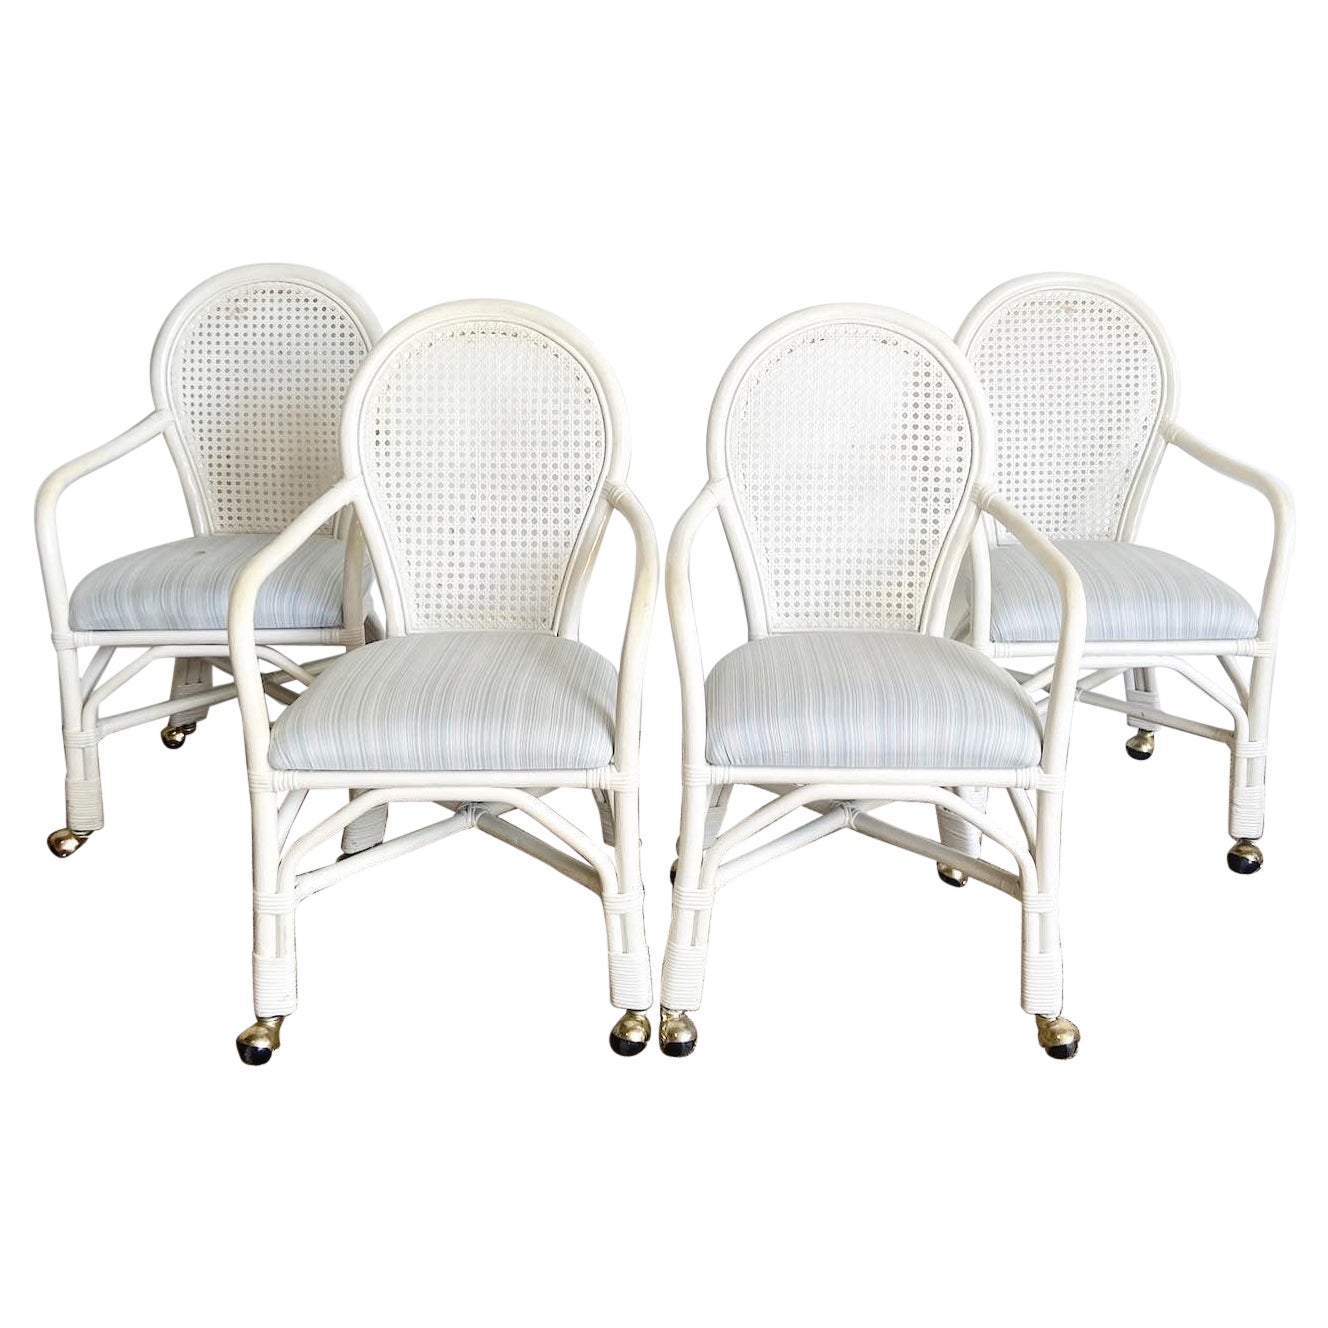 Regency White Cane Back Bamboo Rattan Dining Chairs on Casters - Set of 4